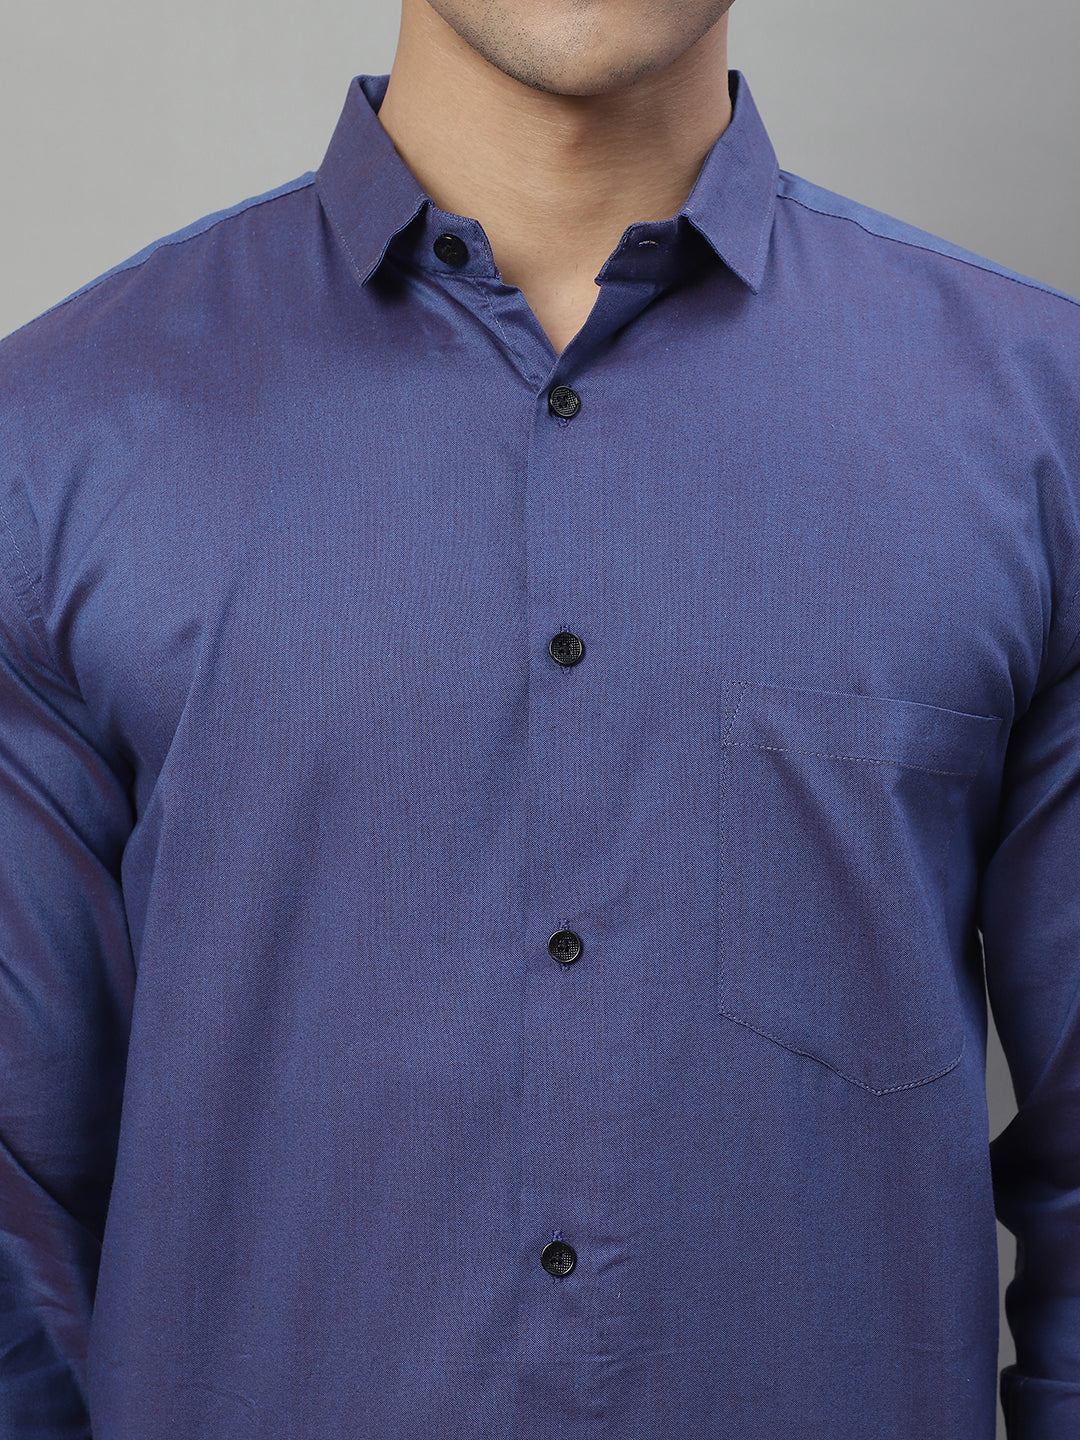 Unique and Classy Casual Shirt - Blue